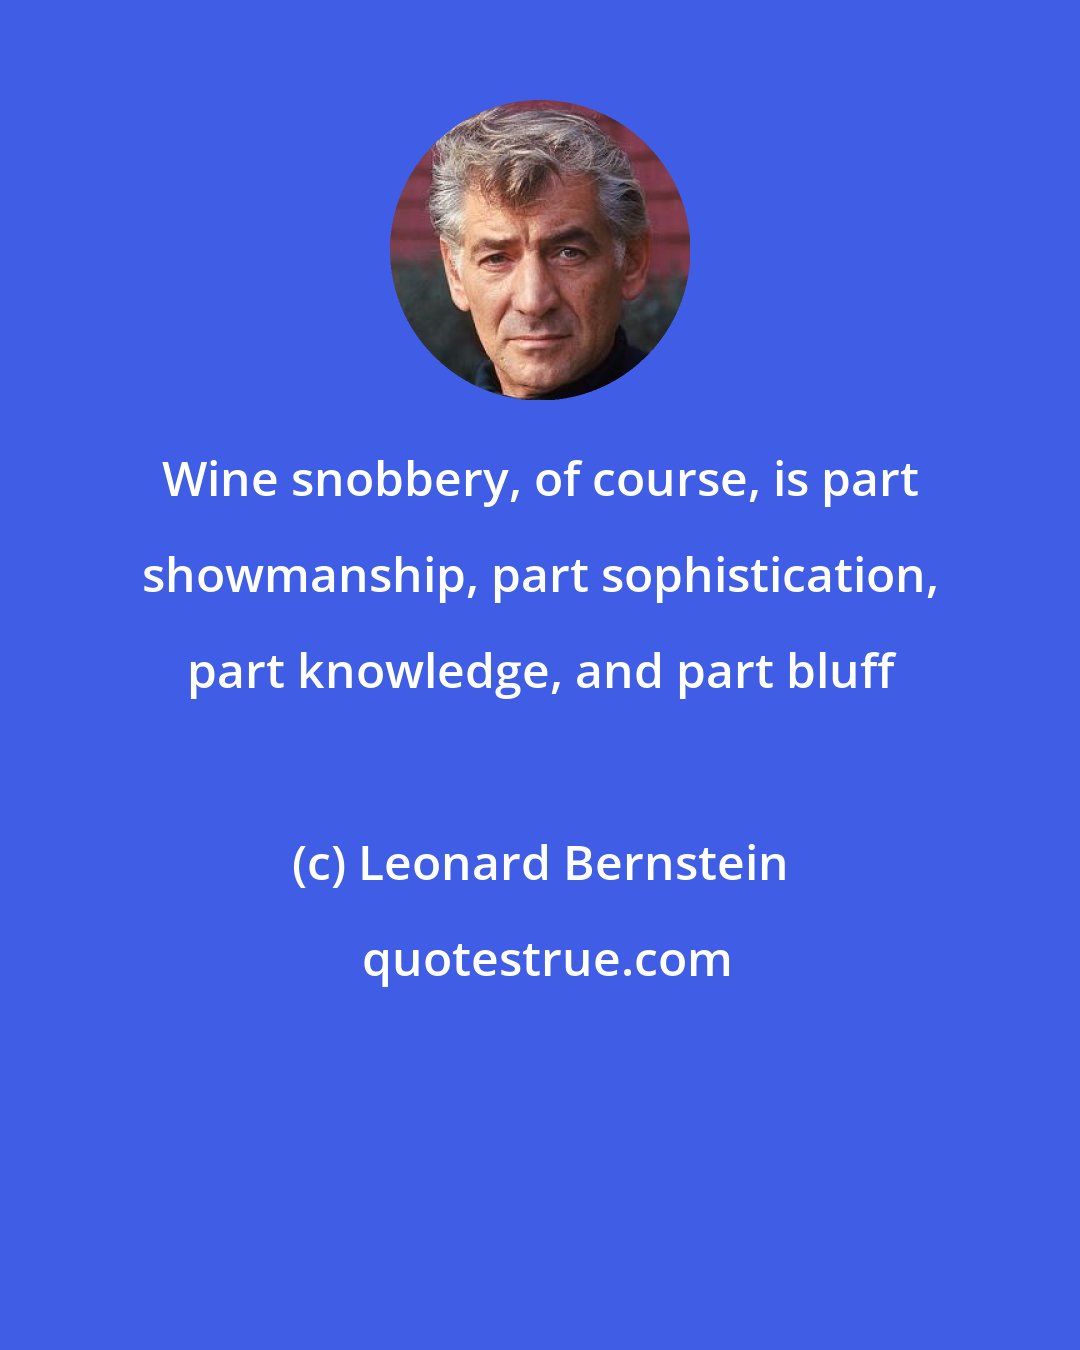 Leonard Bernstein: Wine snobbery, of course, is part showmanship, part sophistication, part knowledge, and part bluff